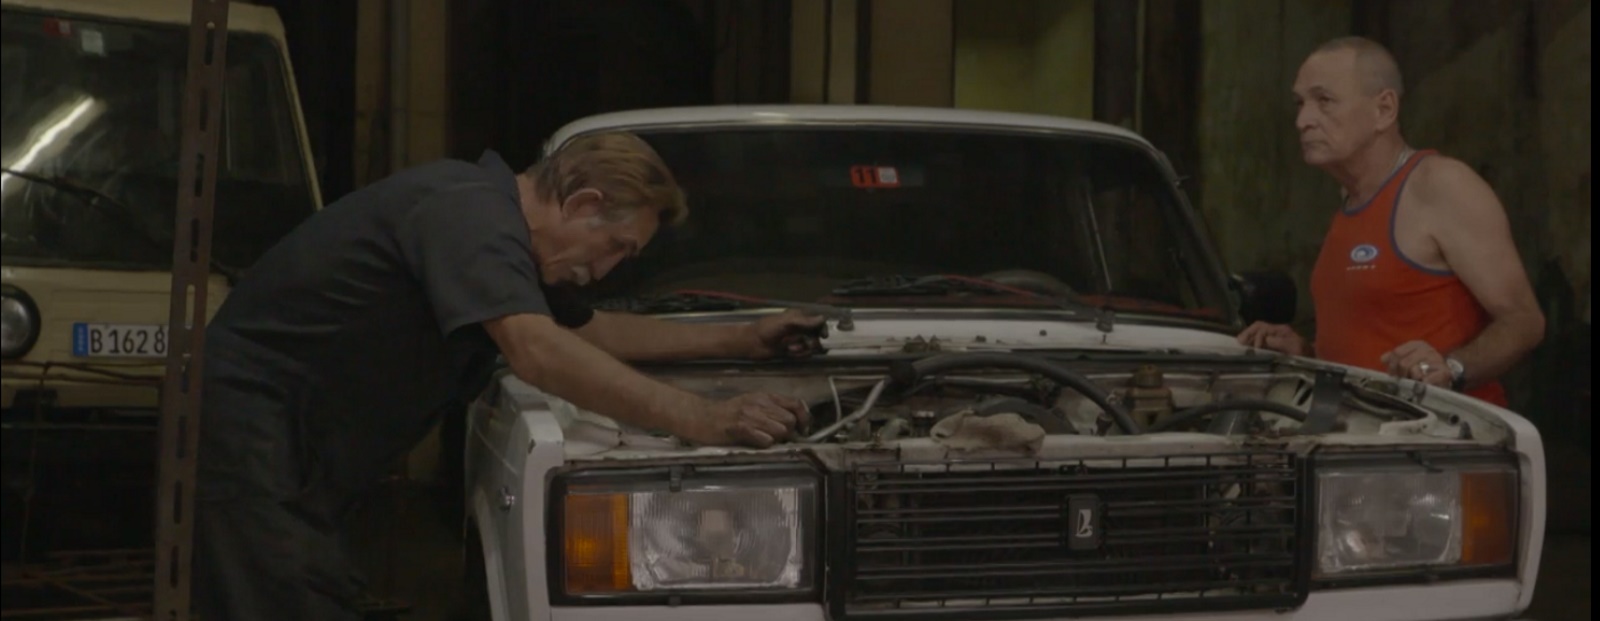 Video: Cuba's Mechanics - the Ultimate Recyclers